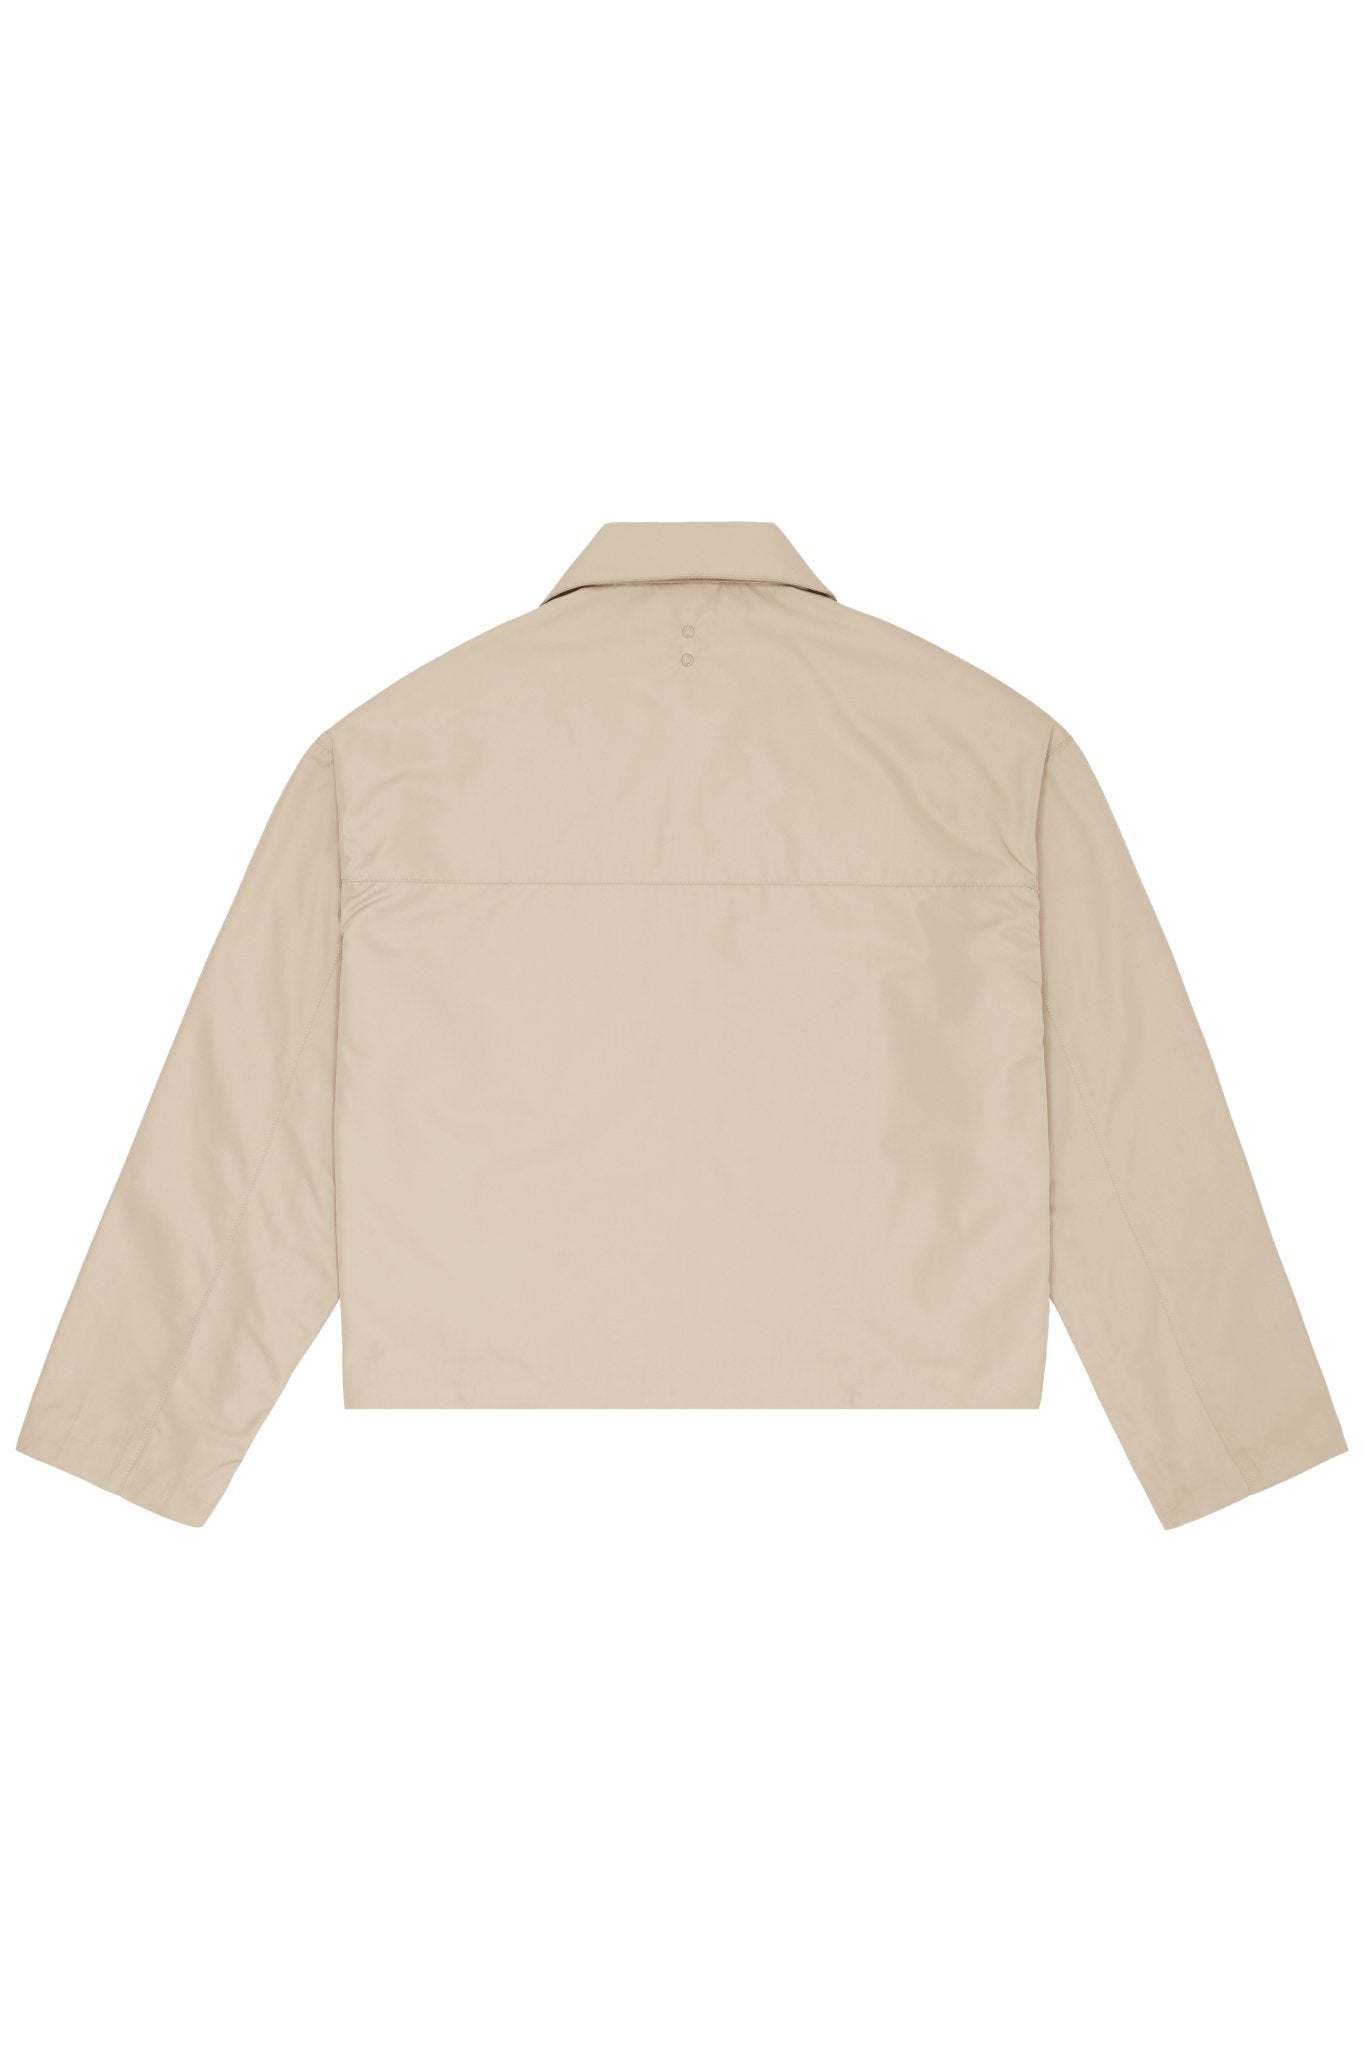 about---blank.comcropped jacket beige